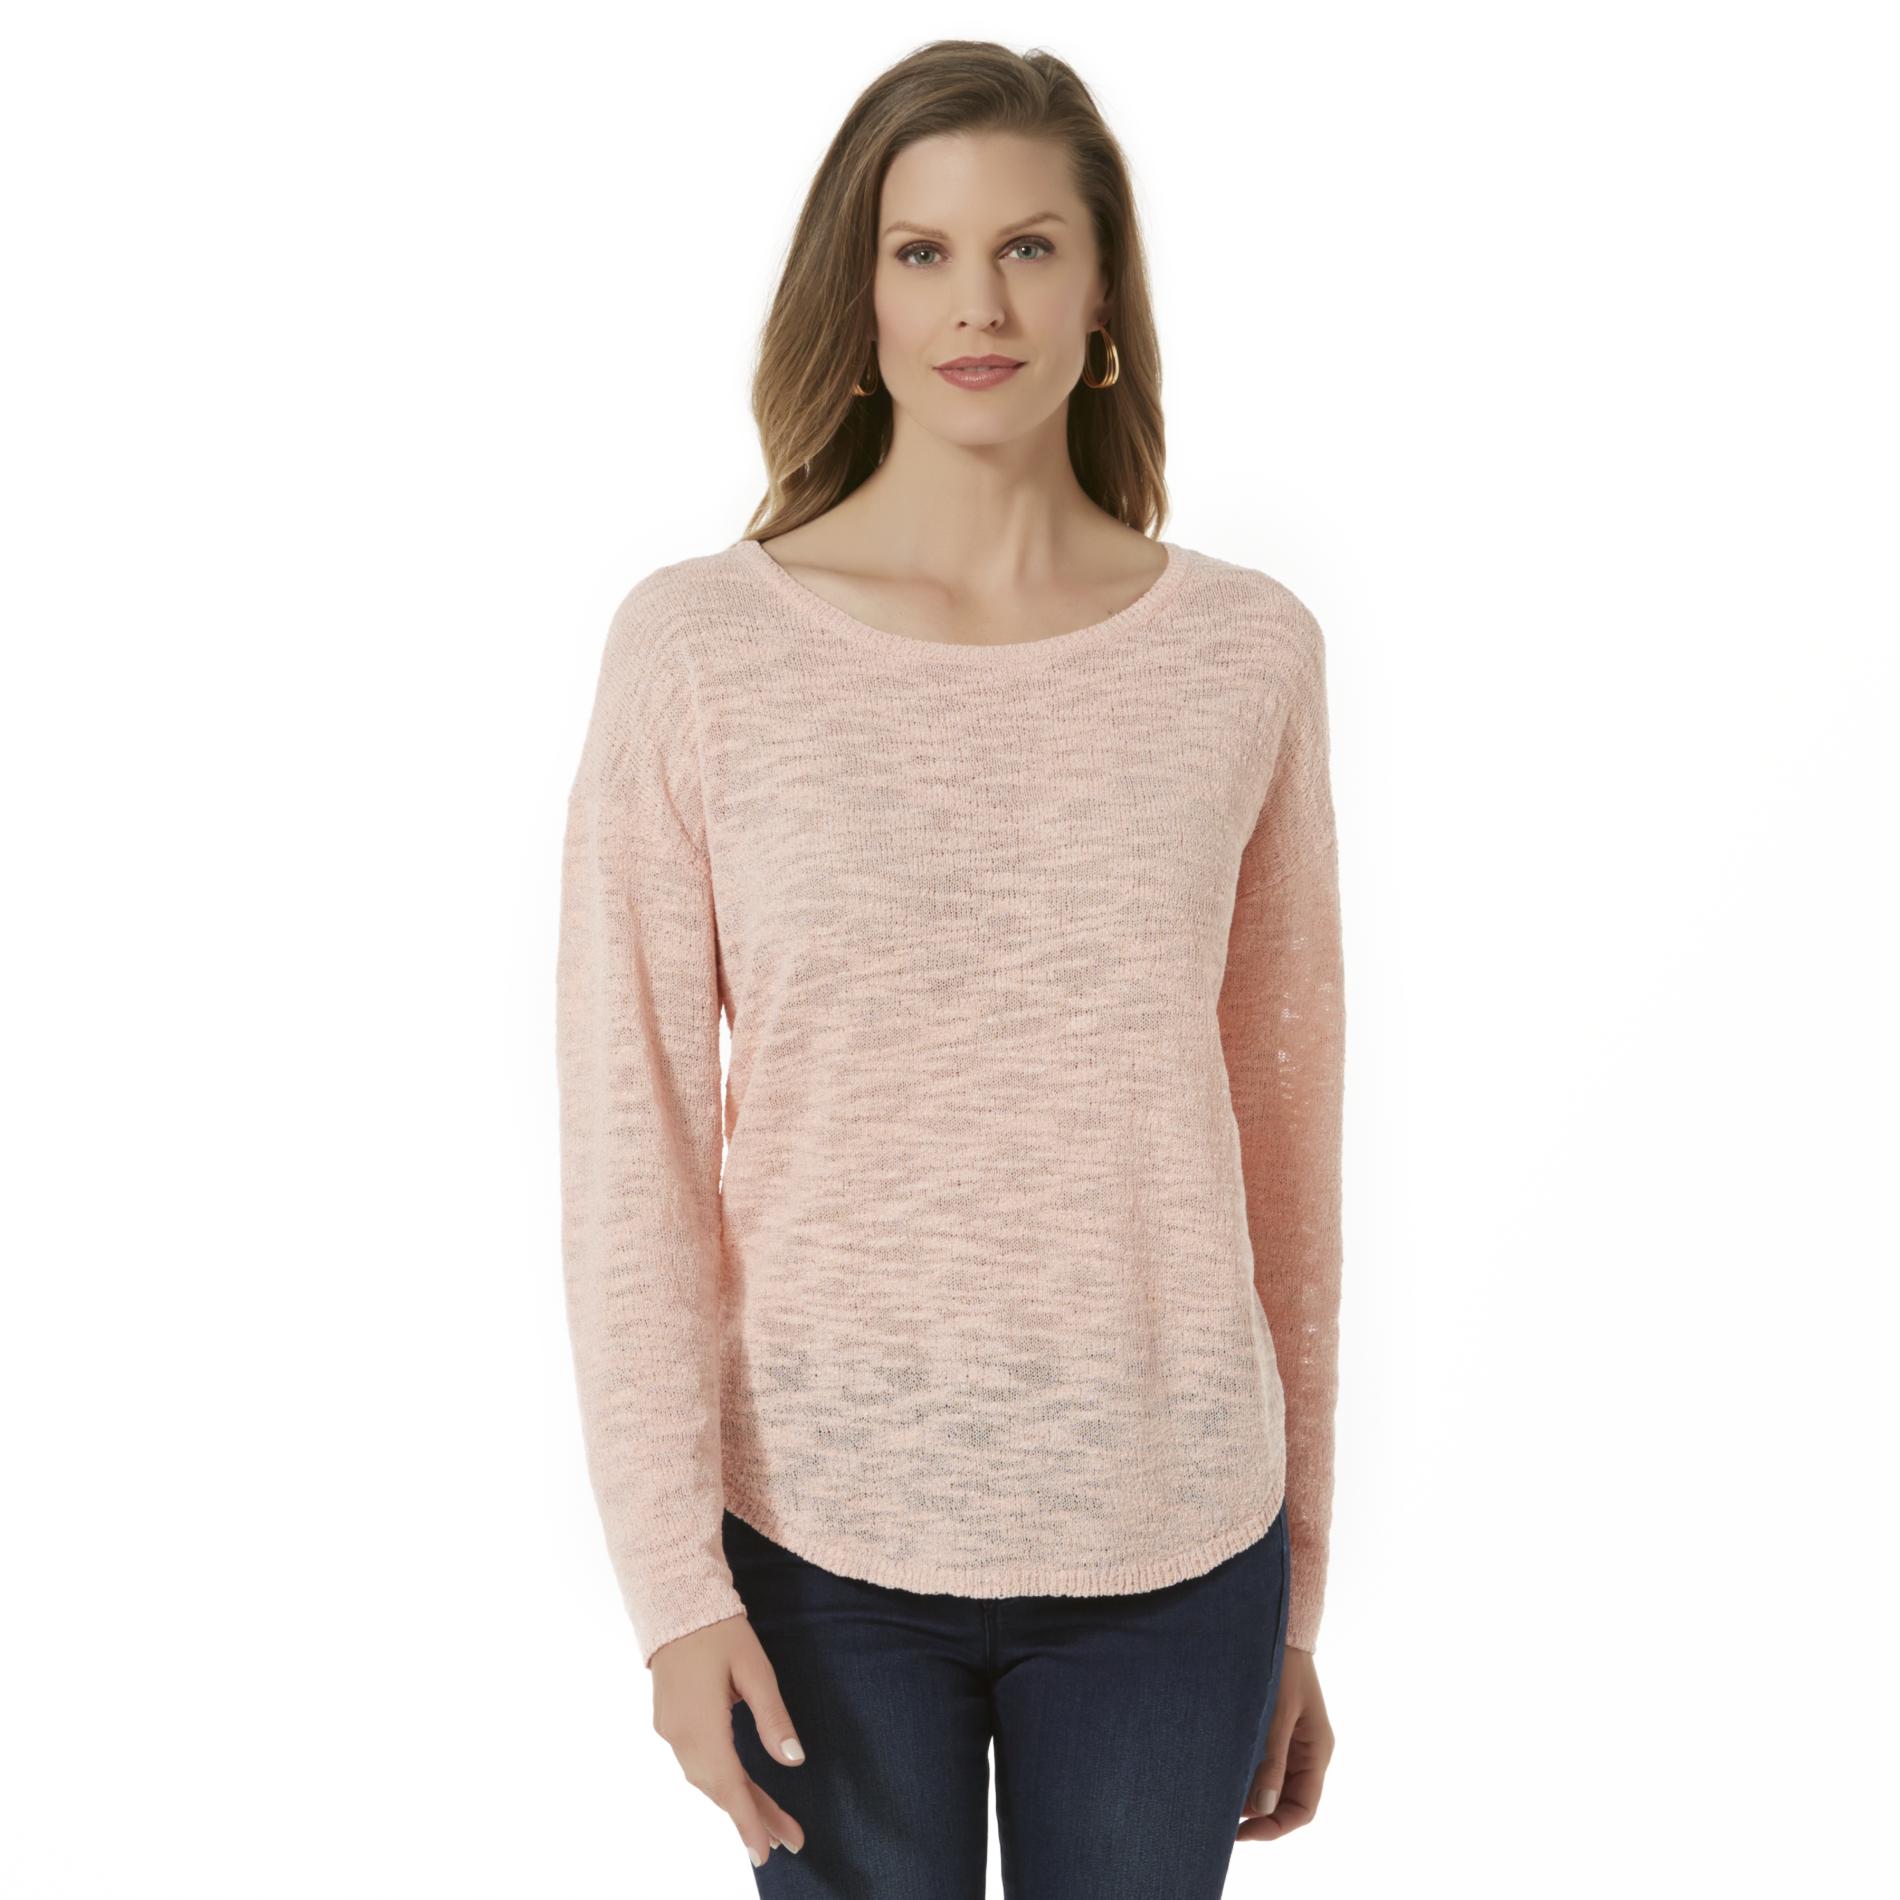 Basic Editions Women's Knit Top - Clothing, Shoes & Jewelry - Clothing ...